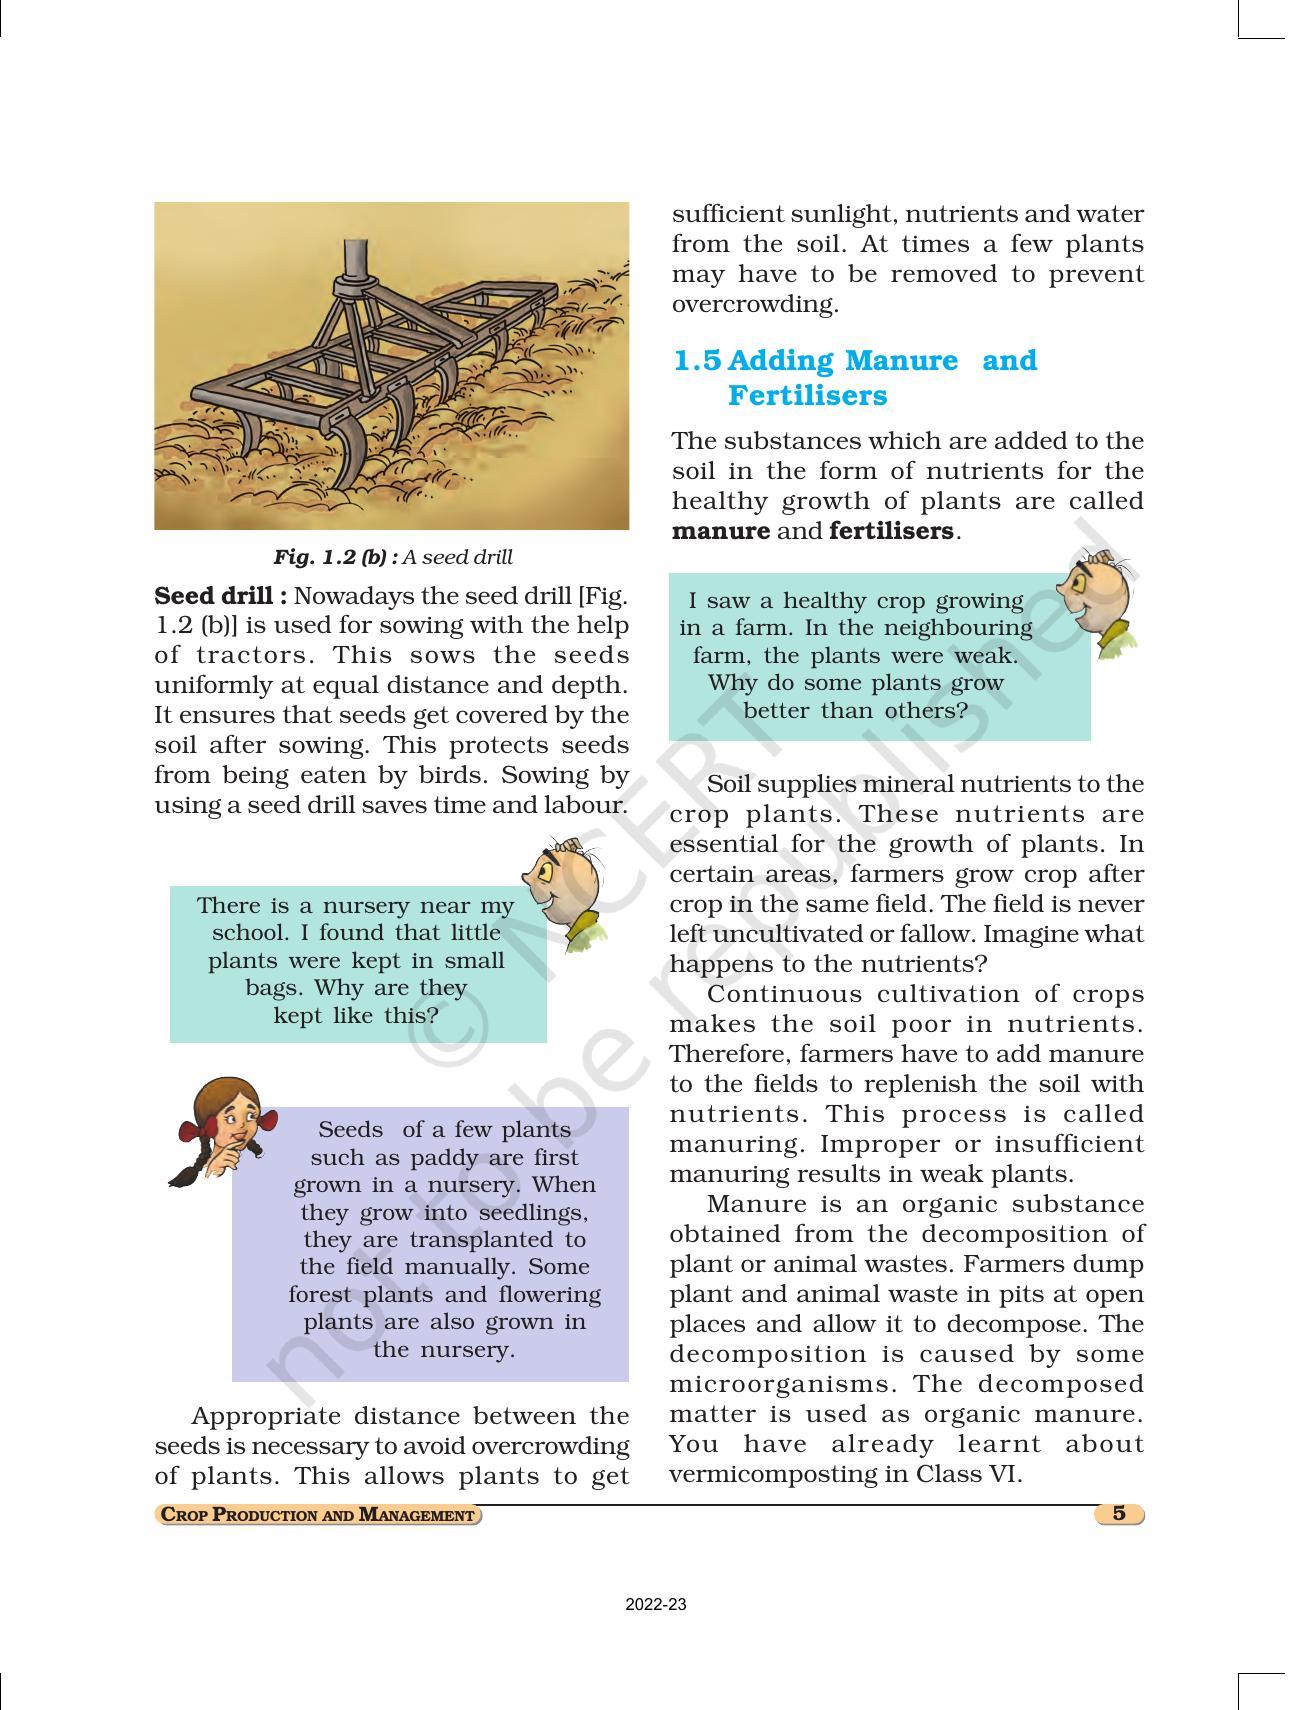 NCERT Book for Class 8 Science Chapter 1 Crop Production and Management - Page 5